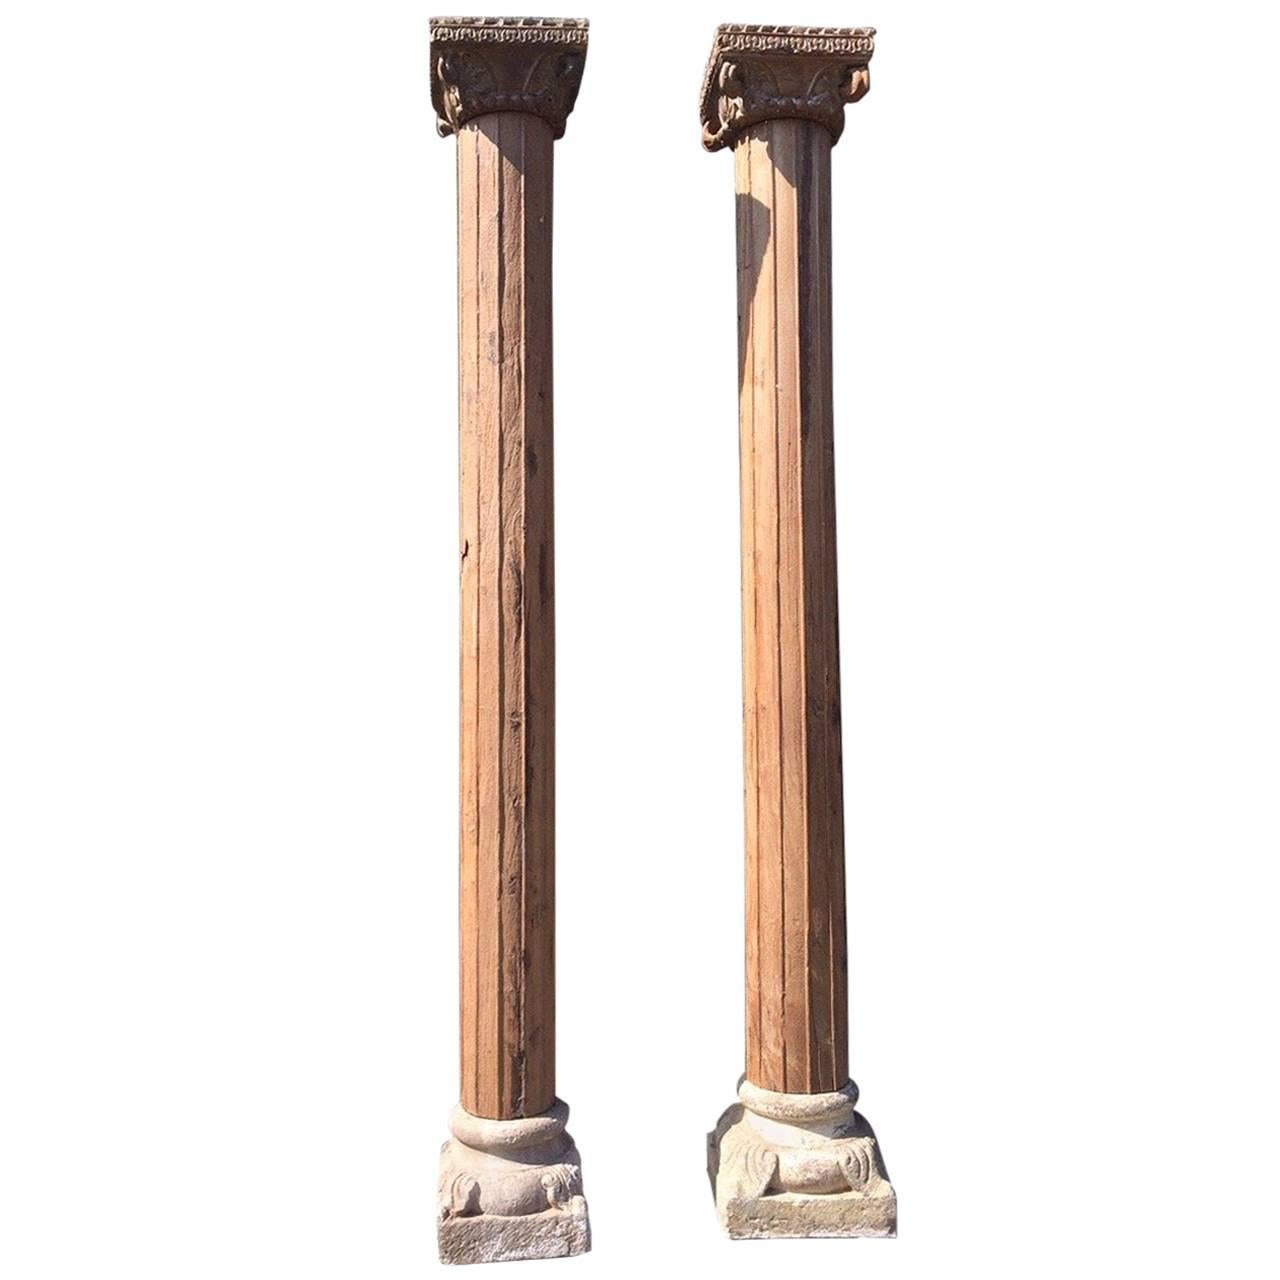 Monumental Solid Wood Carved Columns with Stone Bases